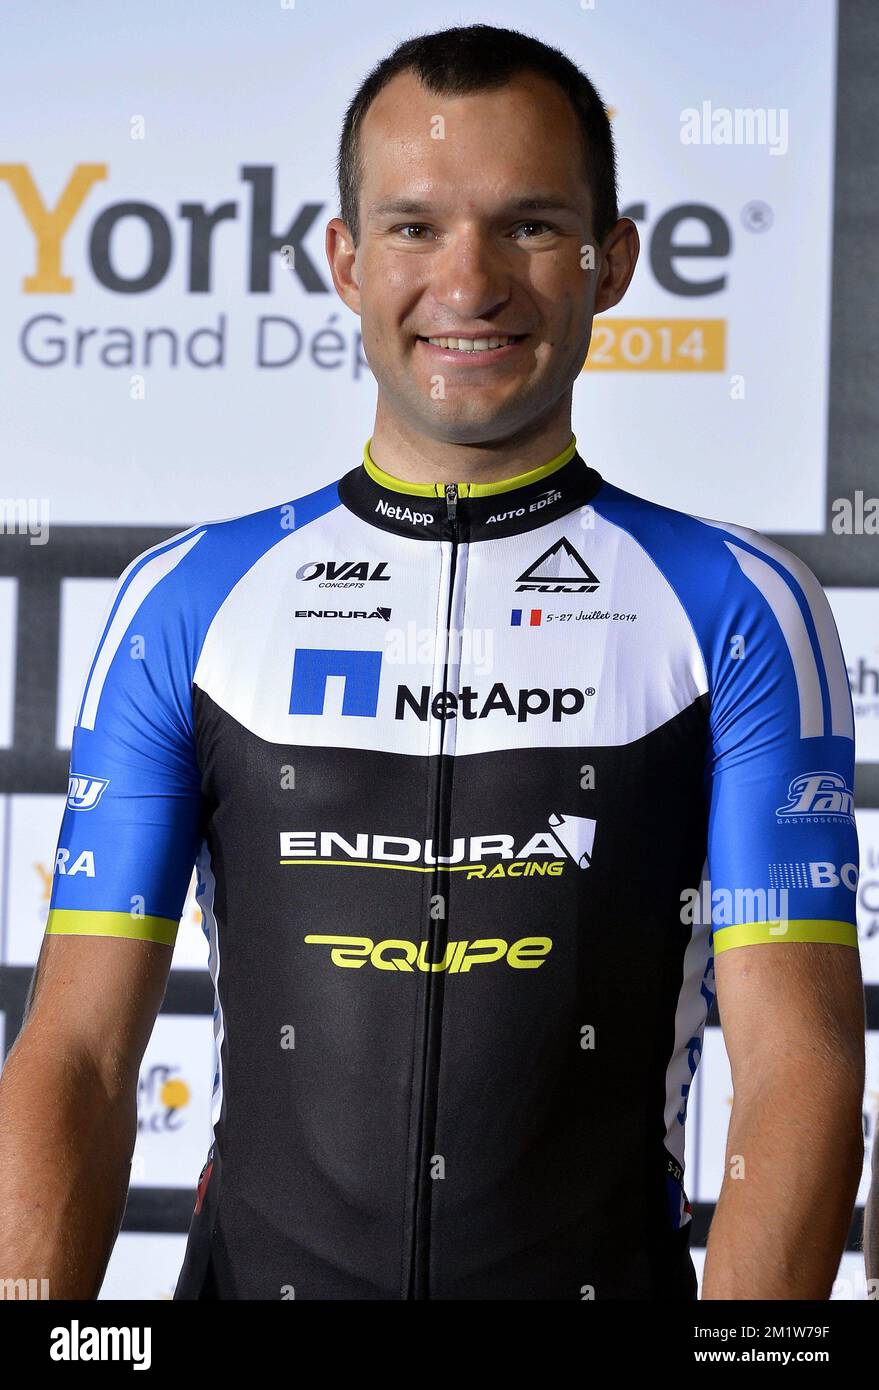 Czech Jan Barta of Team NetApp-Endura pictured at the presentation of the race, two days before the 'Grand Depart' of the 2014 edition of the Tour de France cycling race, in Leeds, United Kingdom, on Thursday 03 July 2014. The 101th edition of the Tour de France starts with the stage Leeds - Harrogate. Stock Photo